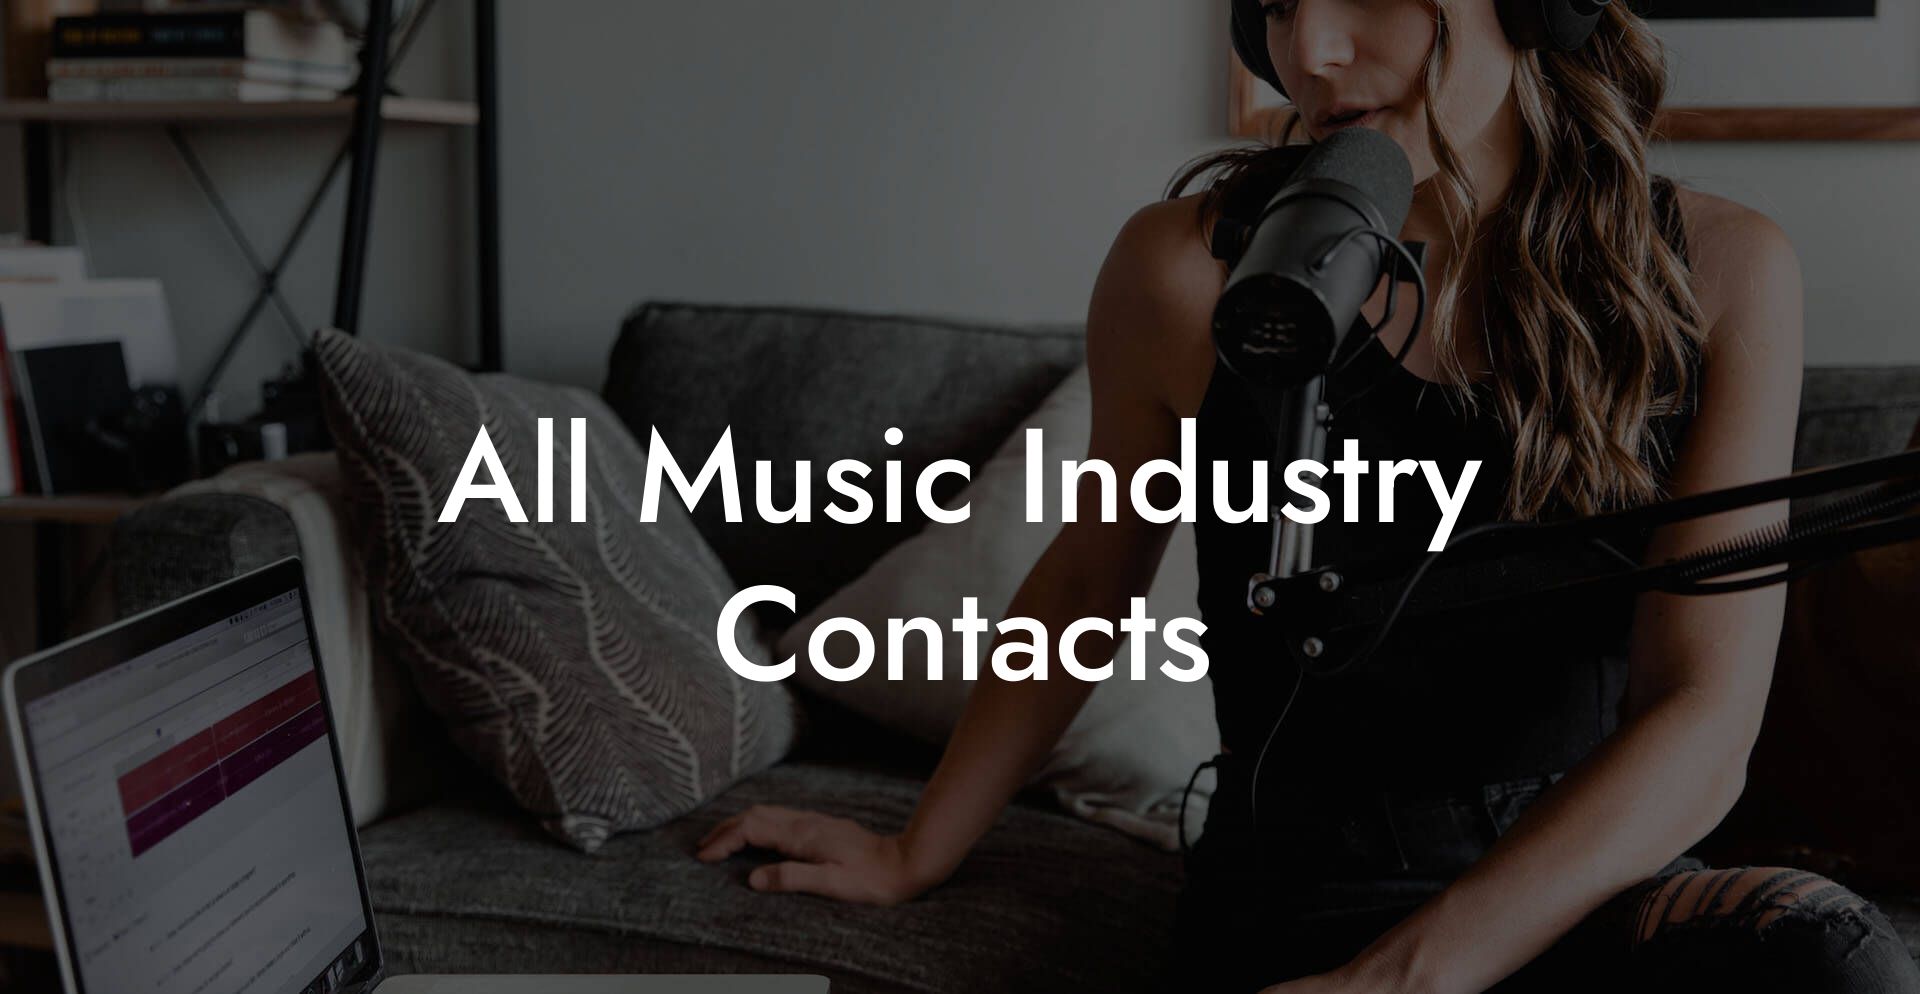 All Music Industry Contacts